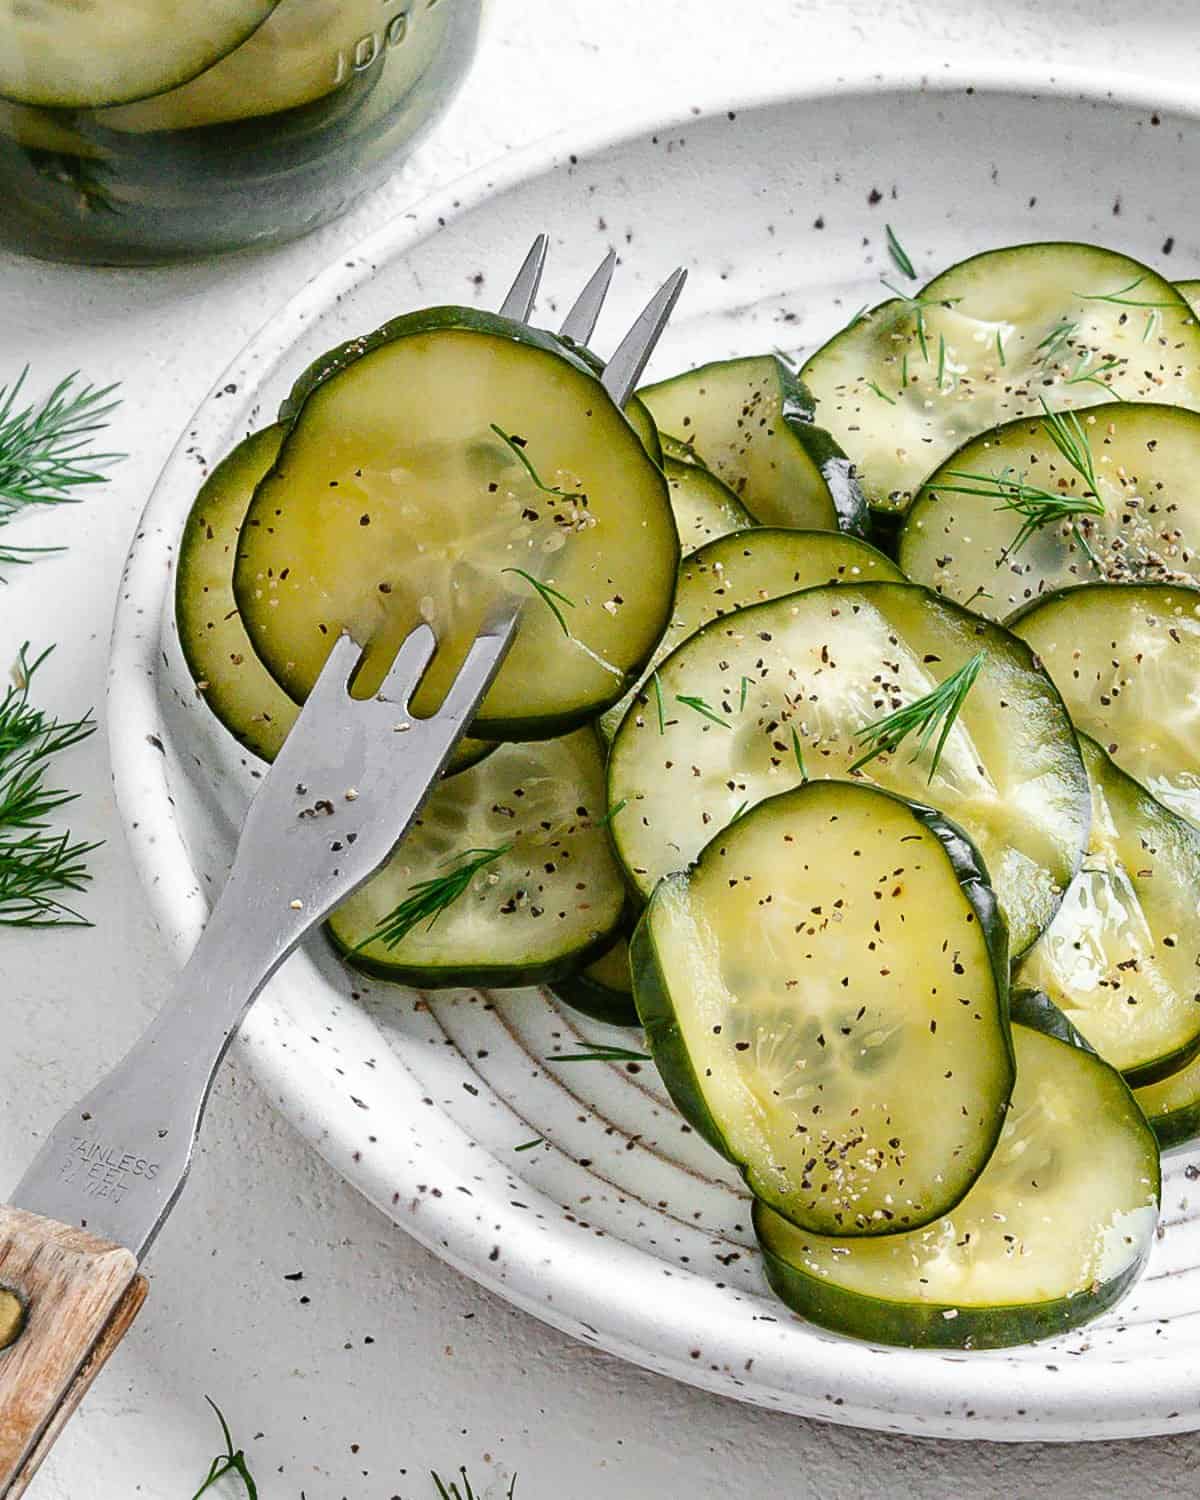 completed Marinated Cucumber Salad on a white plate with a frok in two pieces against a white surface